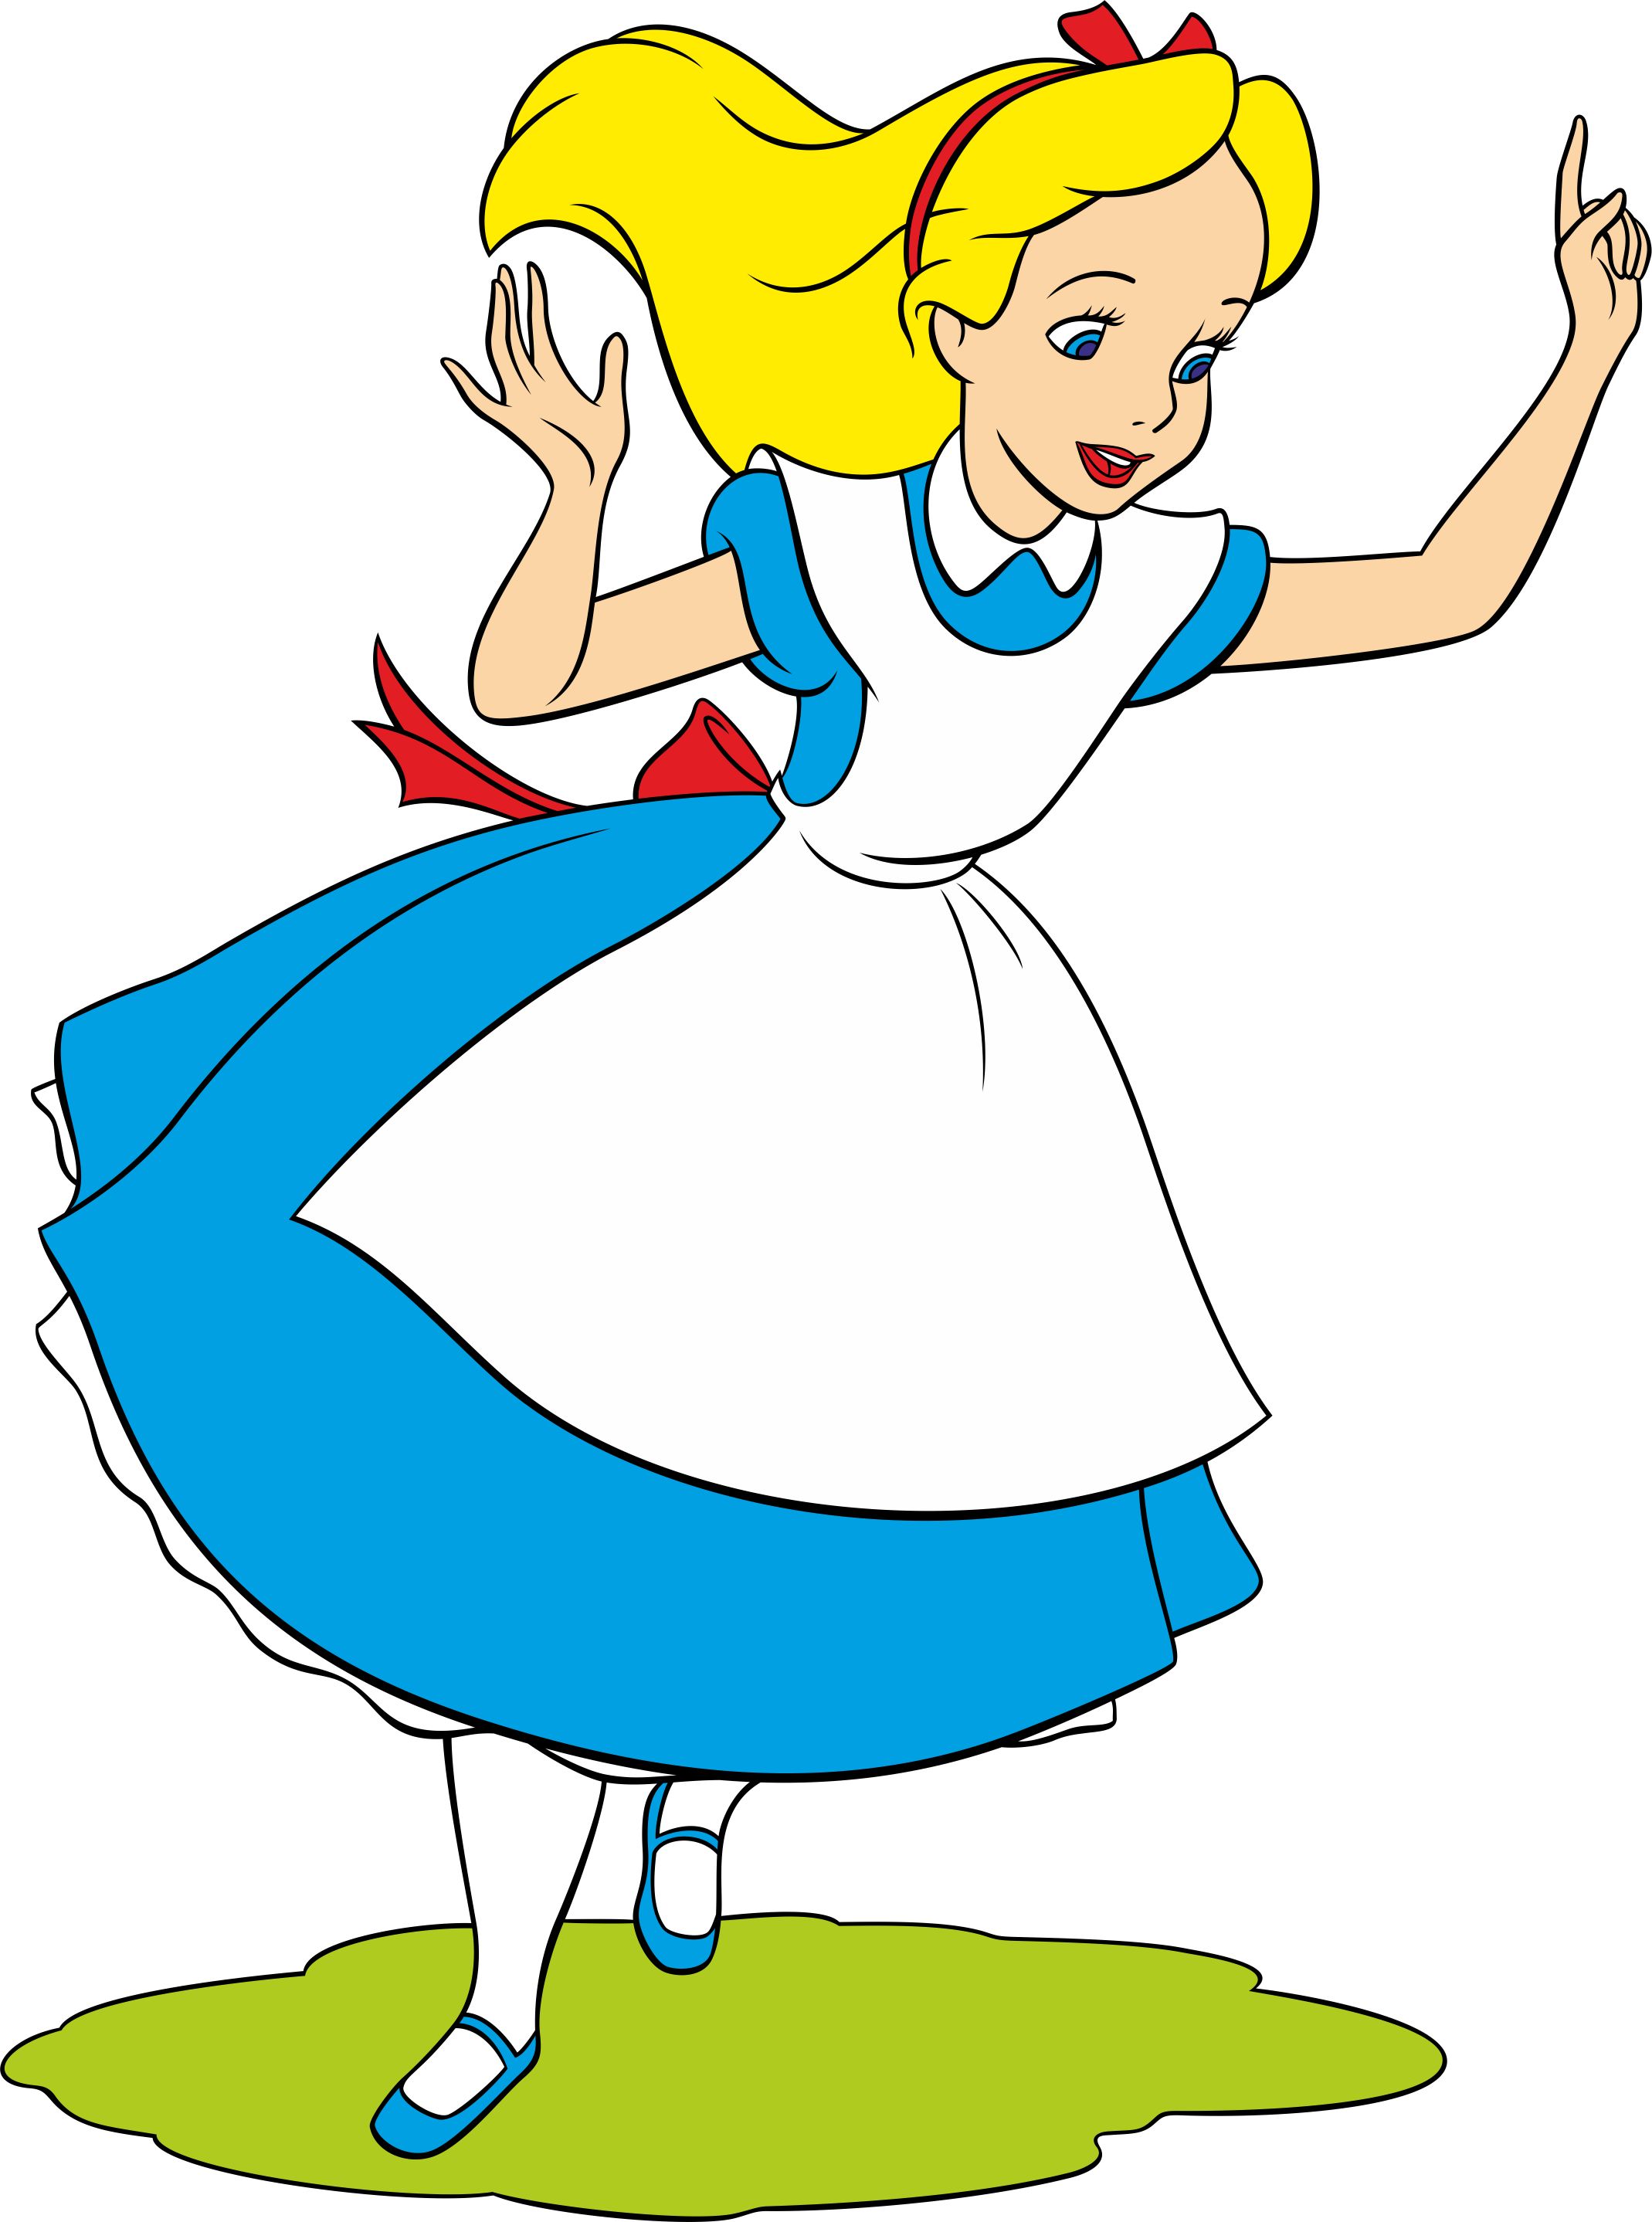 Clip Arts Related To : alice in wonderland png. 